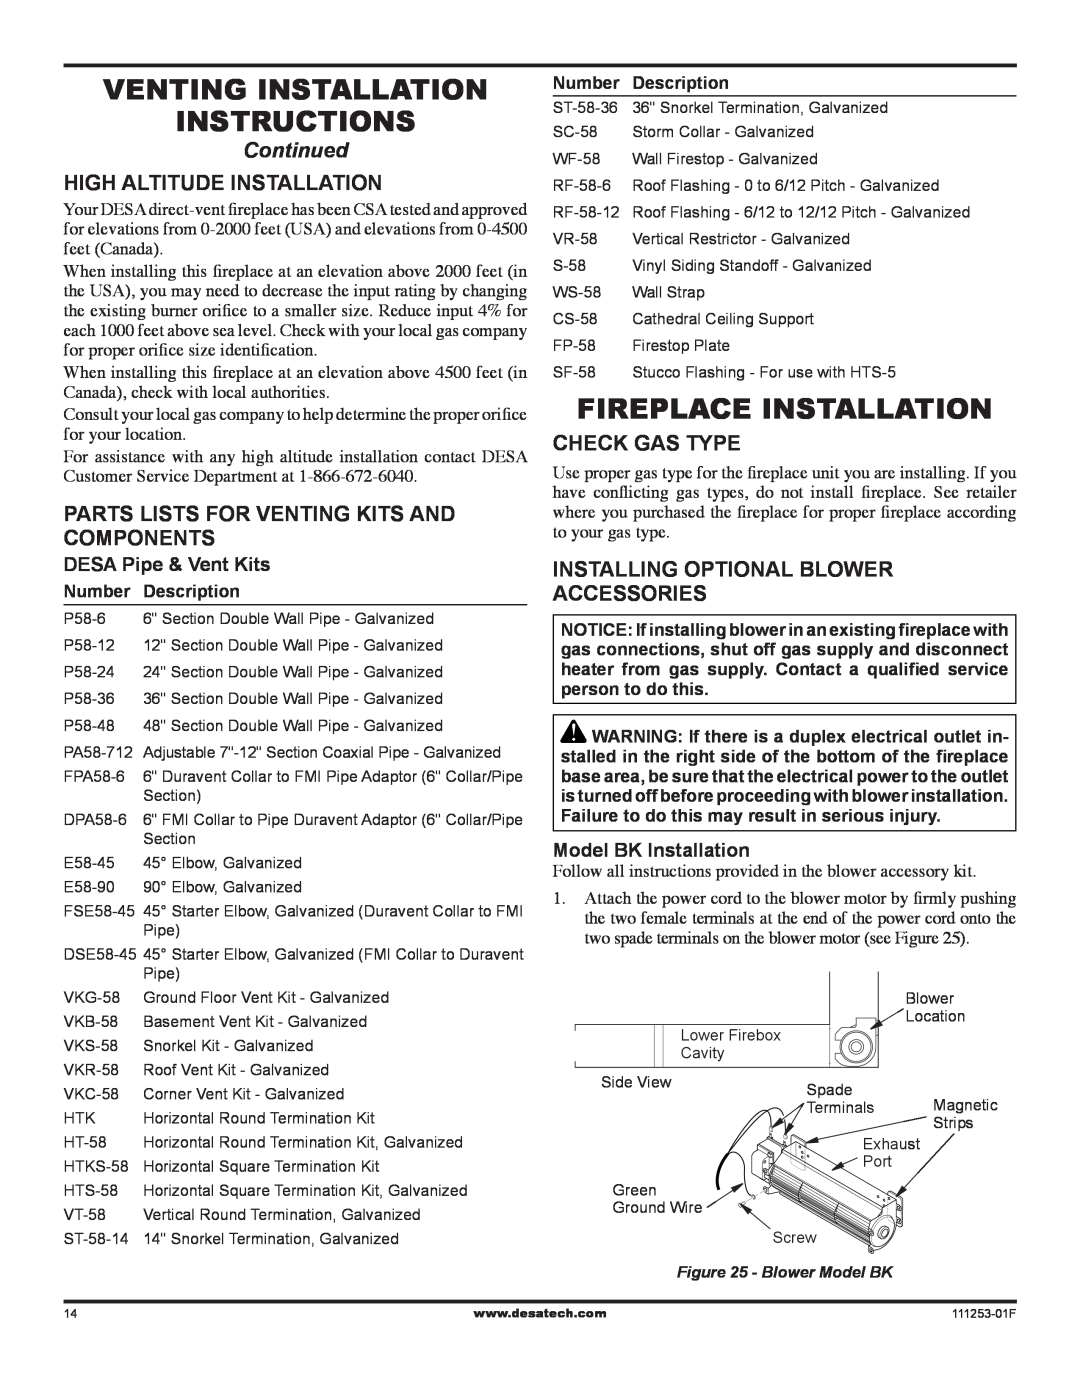 Desa (V)V36EN-B Fireplace Installation, High Altitude Installation, Parts lists for venting kits and components, Continued 